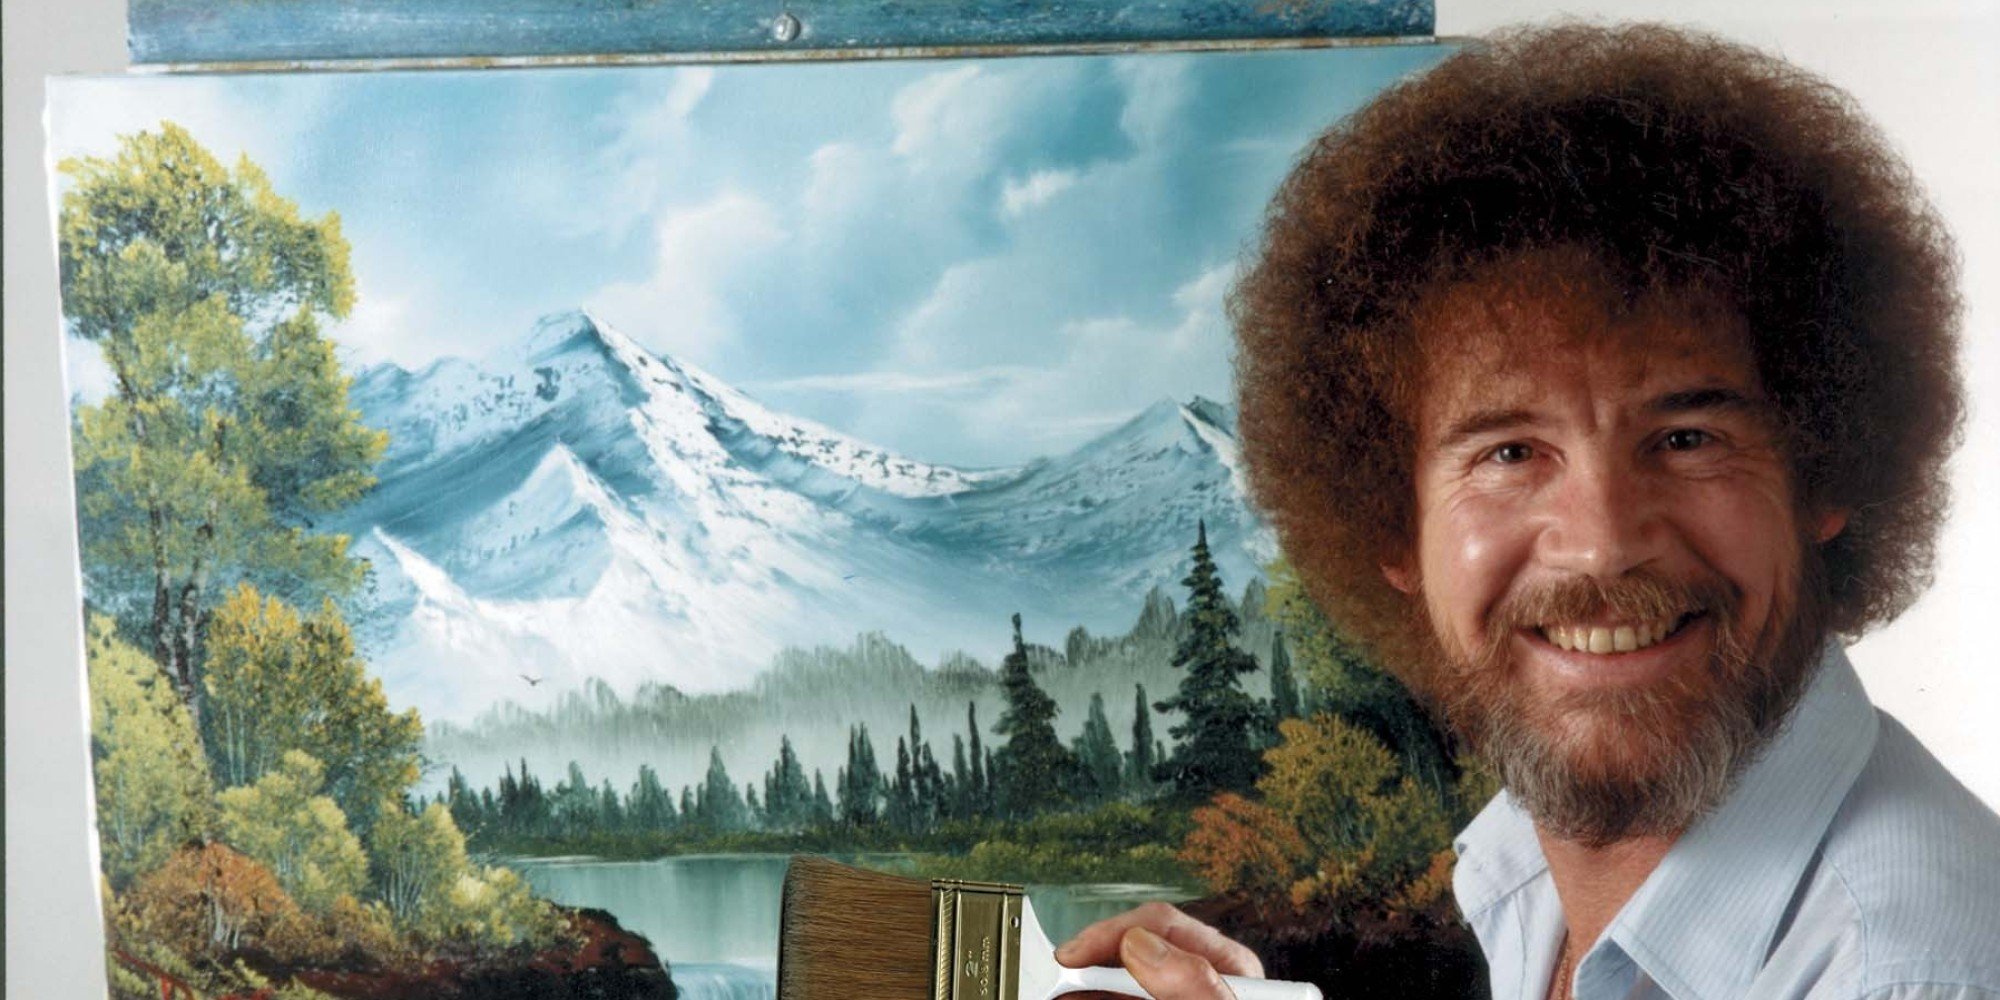 Buy Bob Ross' first TV painting for $9.85 million